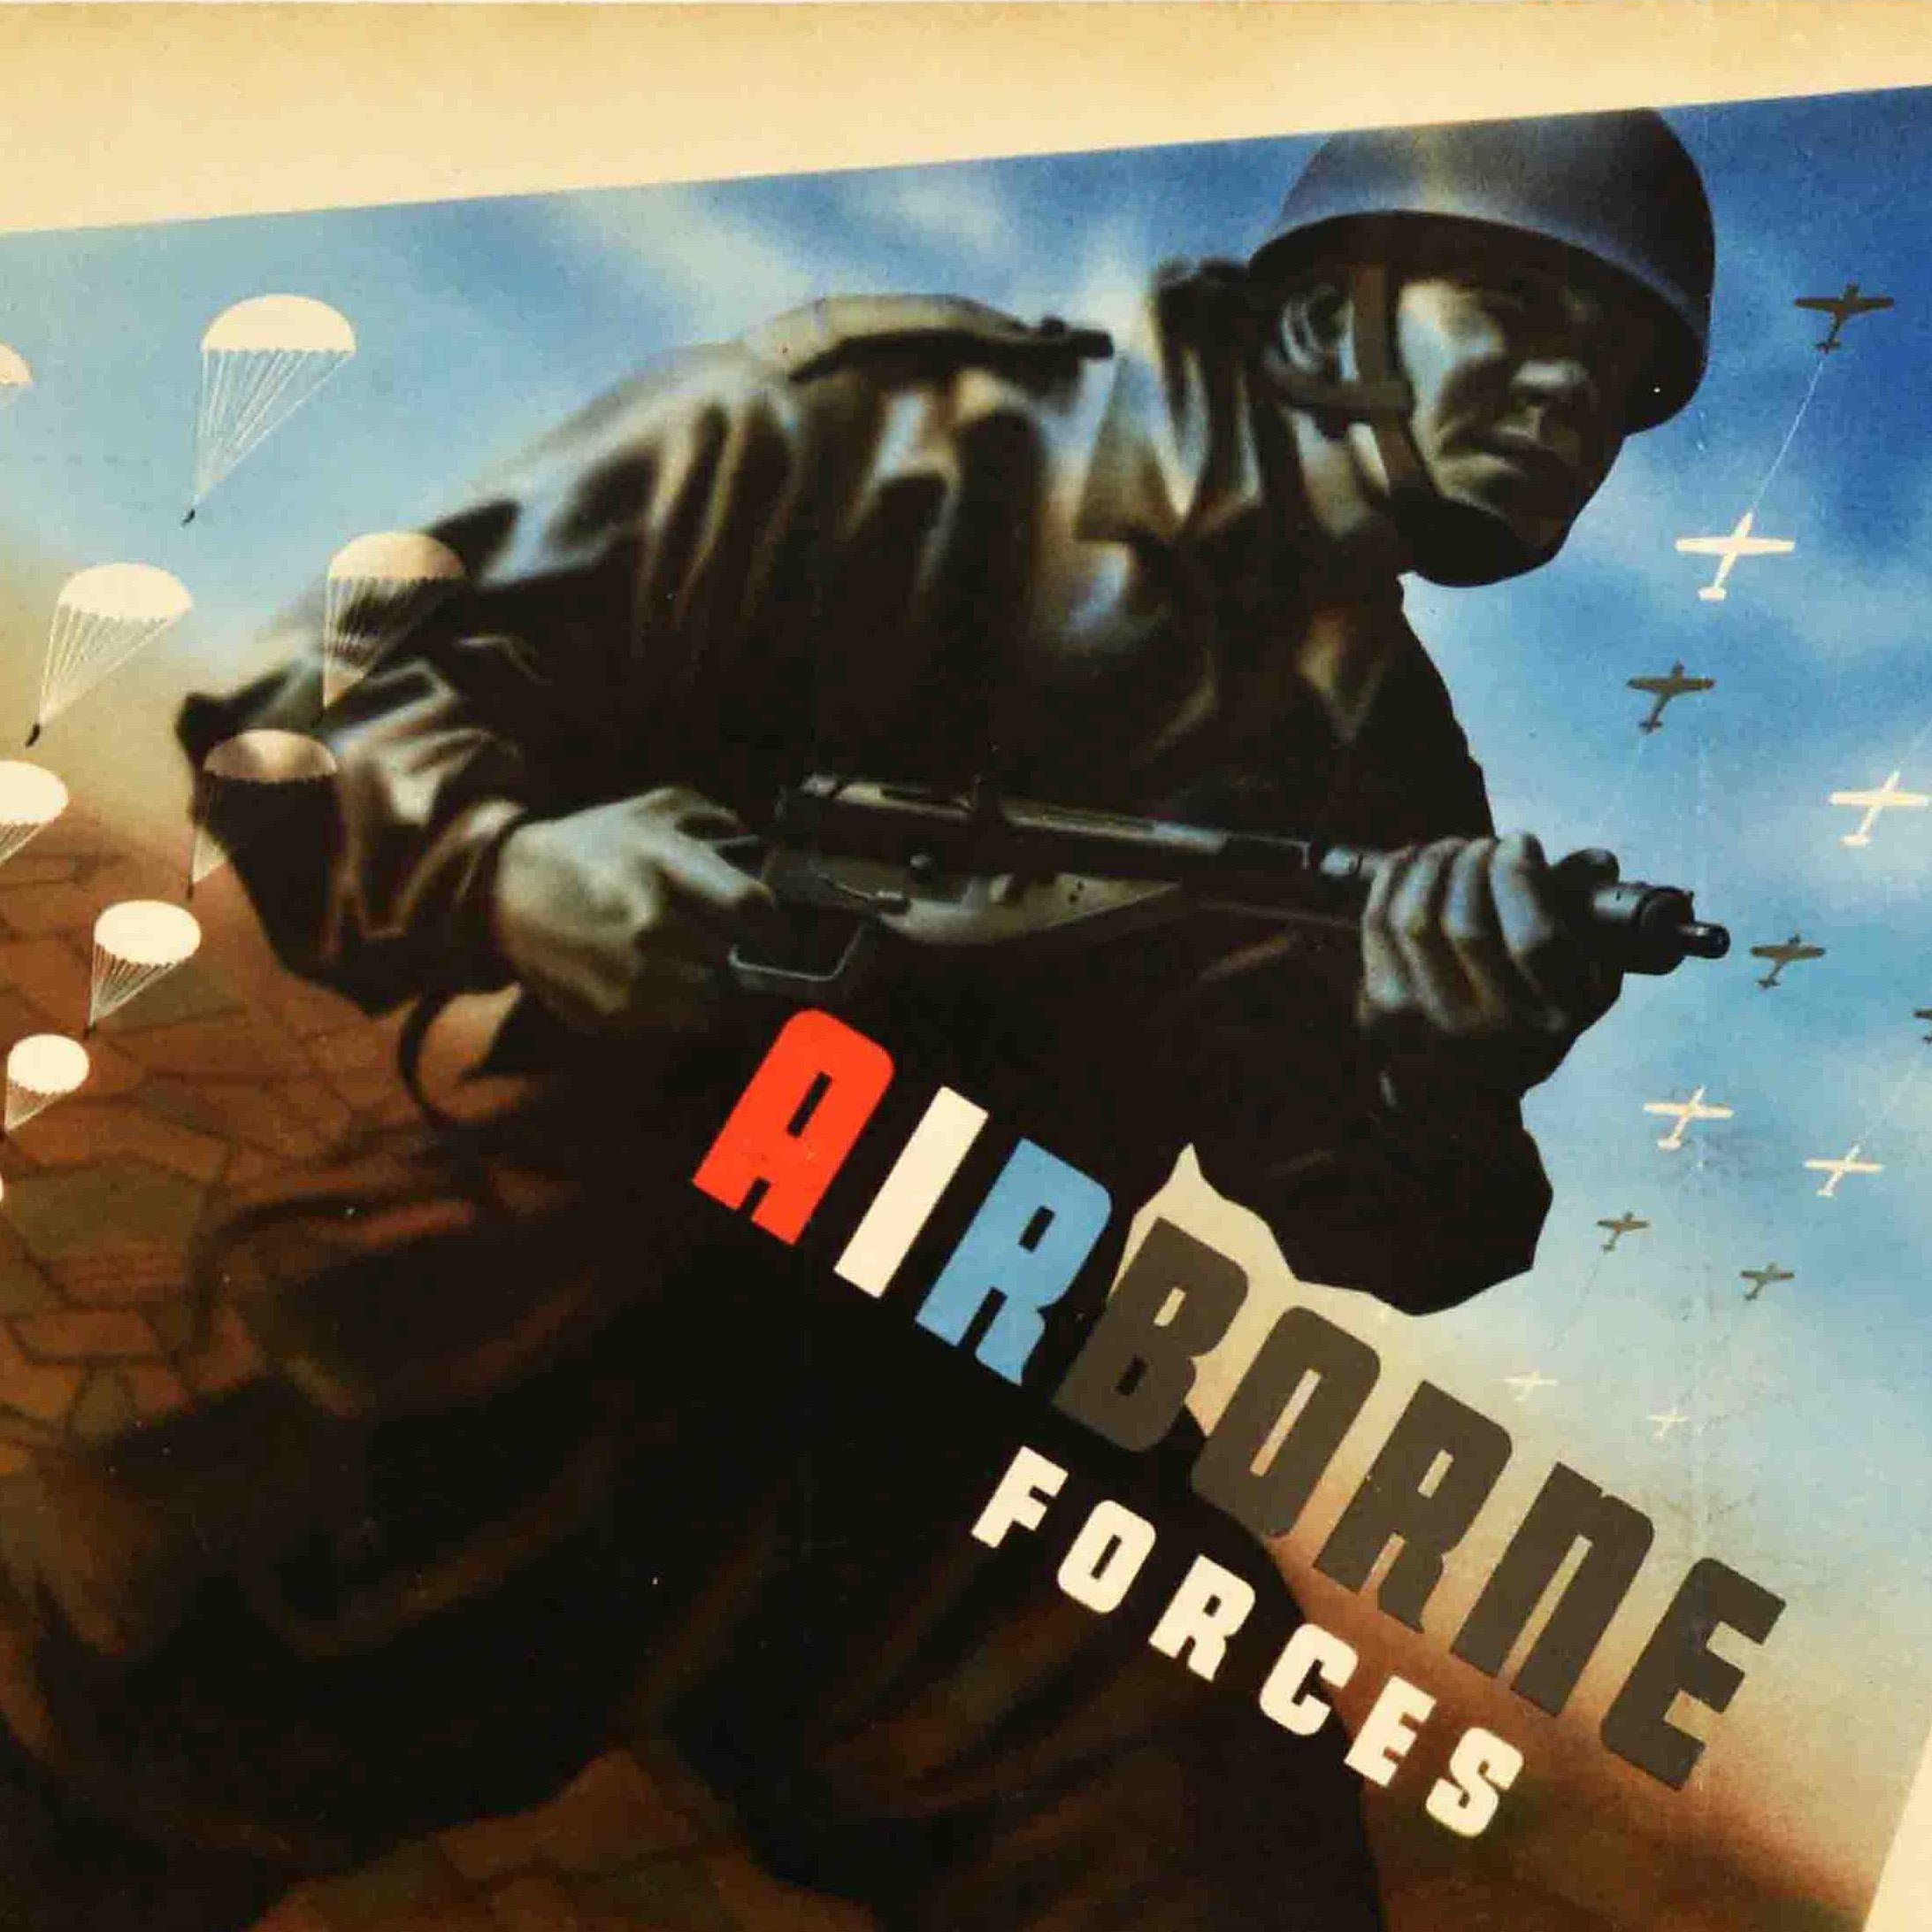 Original Vintage WWII Recruitment Poster Airborne Forces British Army Troops - Print by Abram Games